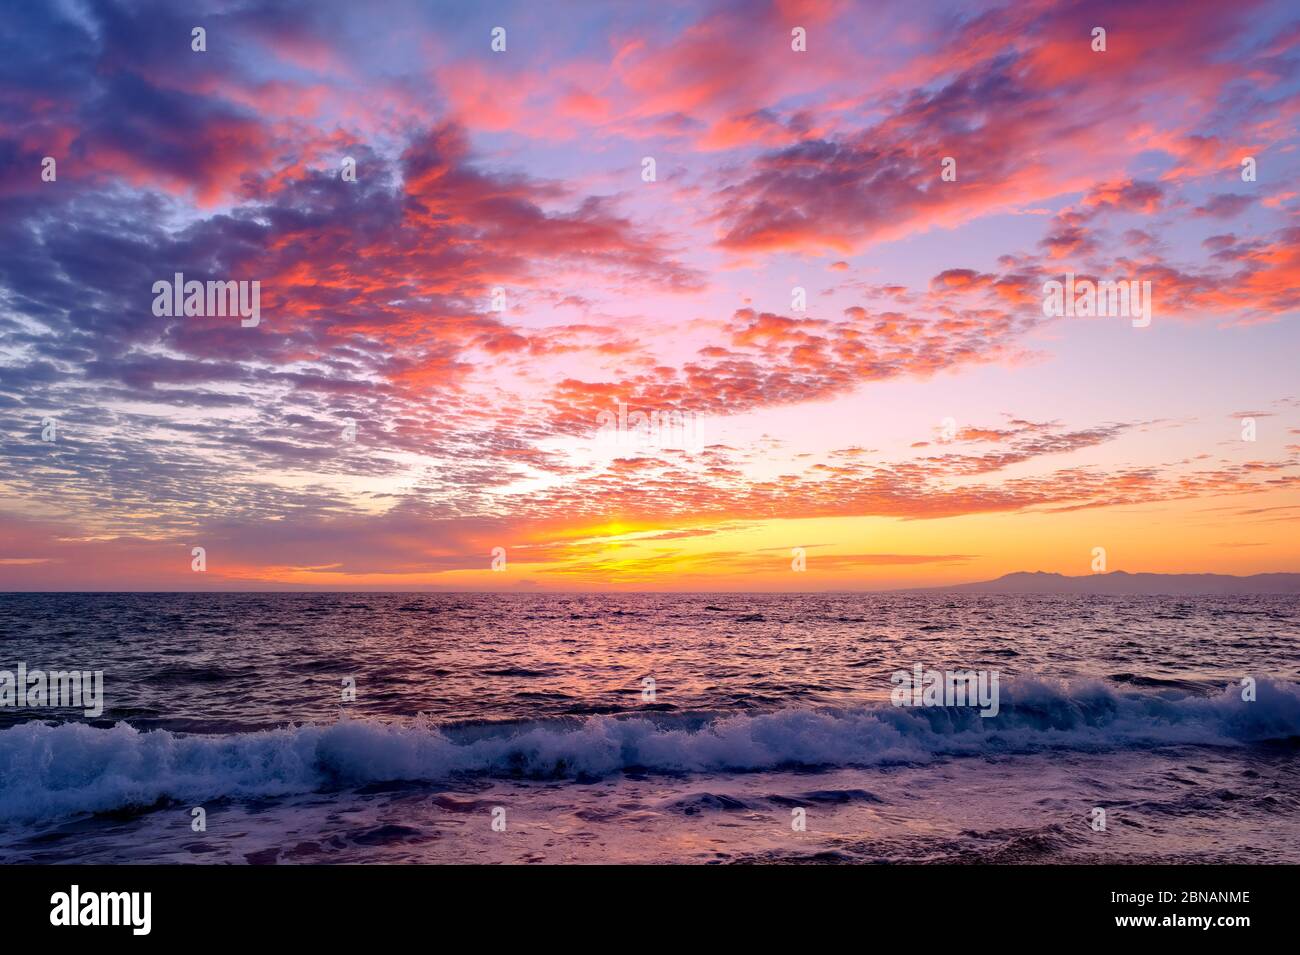 Ocean Sunset is a Surreal Beautiful Inspirational Uplifting Image of Hope and Faith Stock Photo